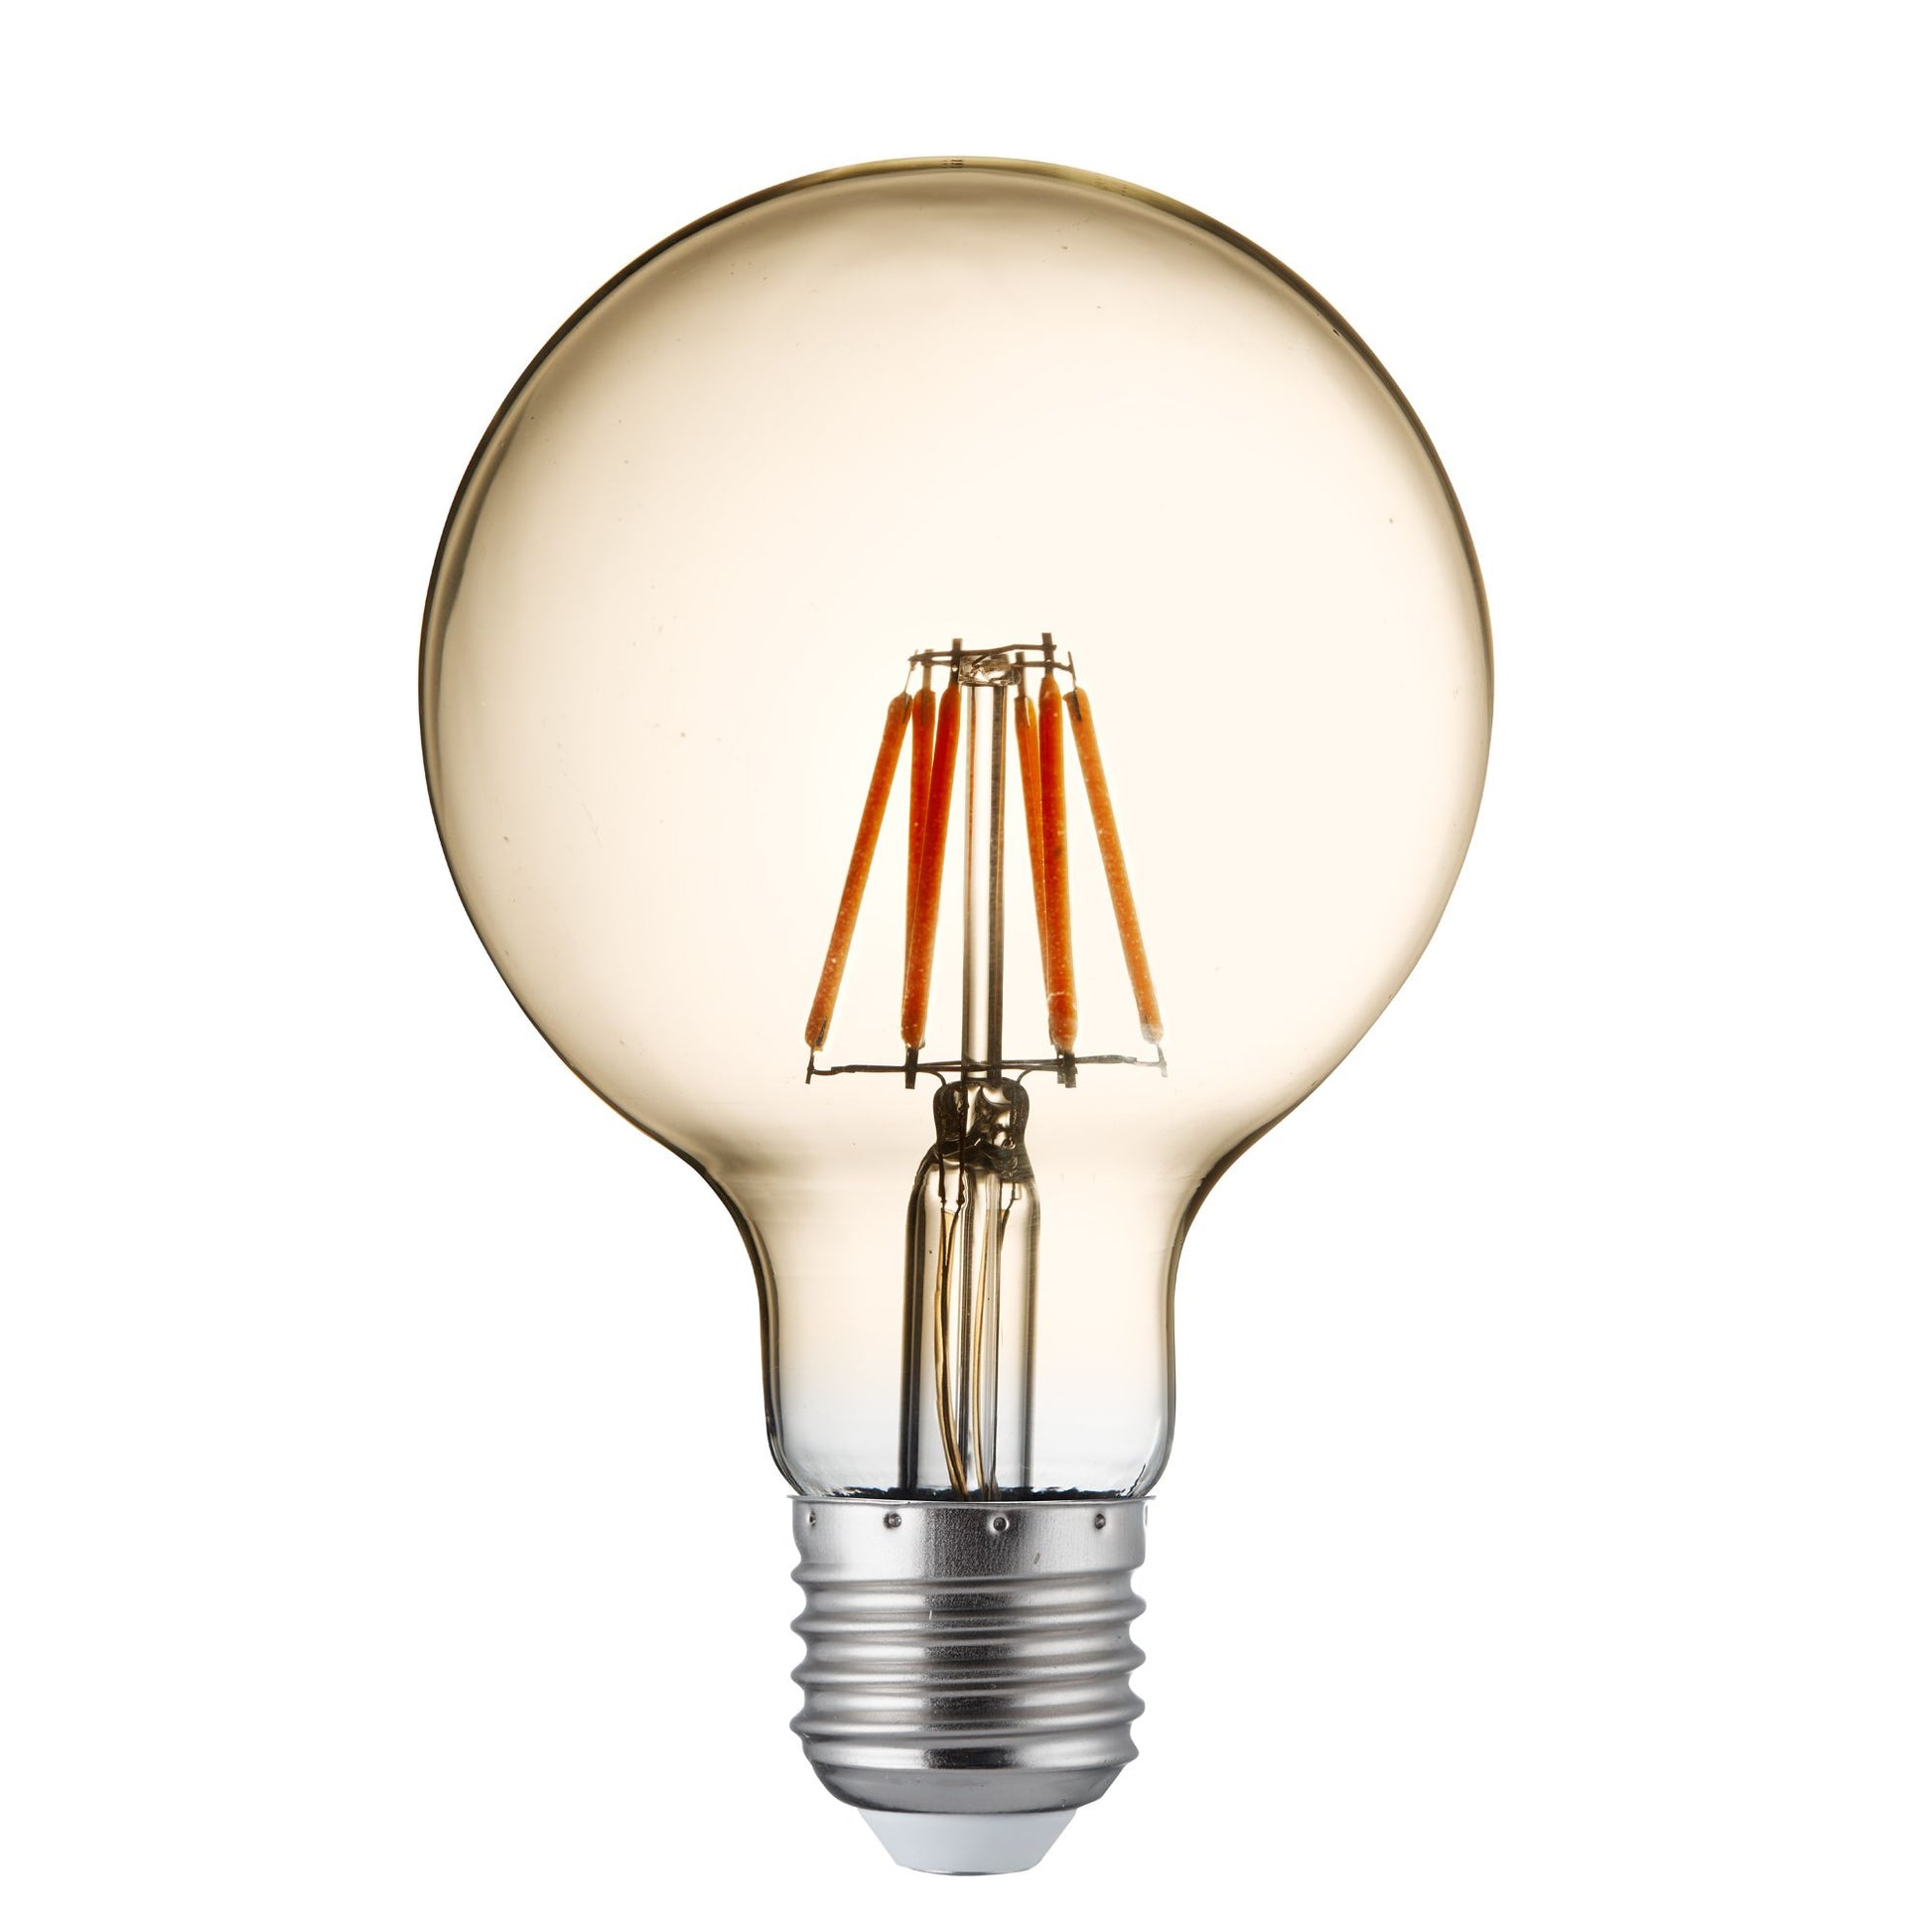 5 Dimmable Led Filament Globe 95Mm Amber Glass E27 6W 600Lm 2700K